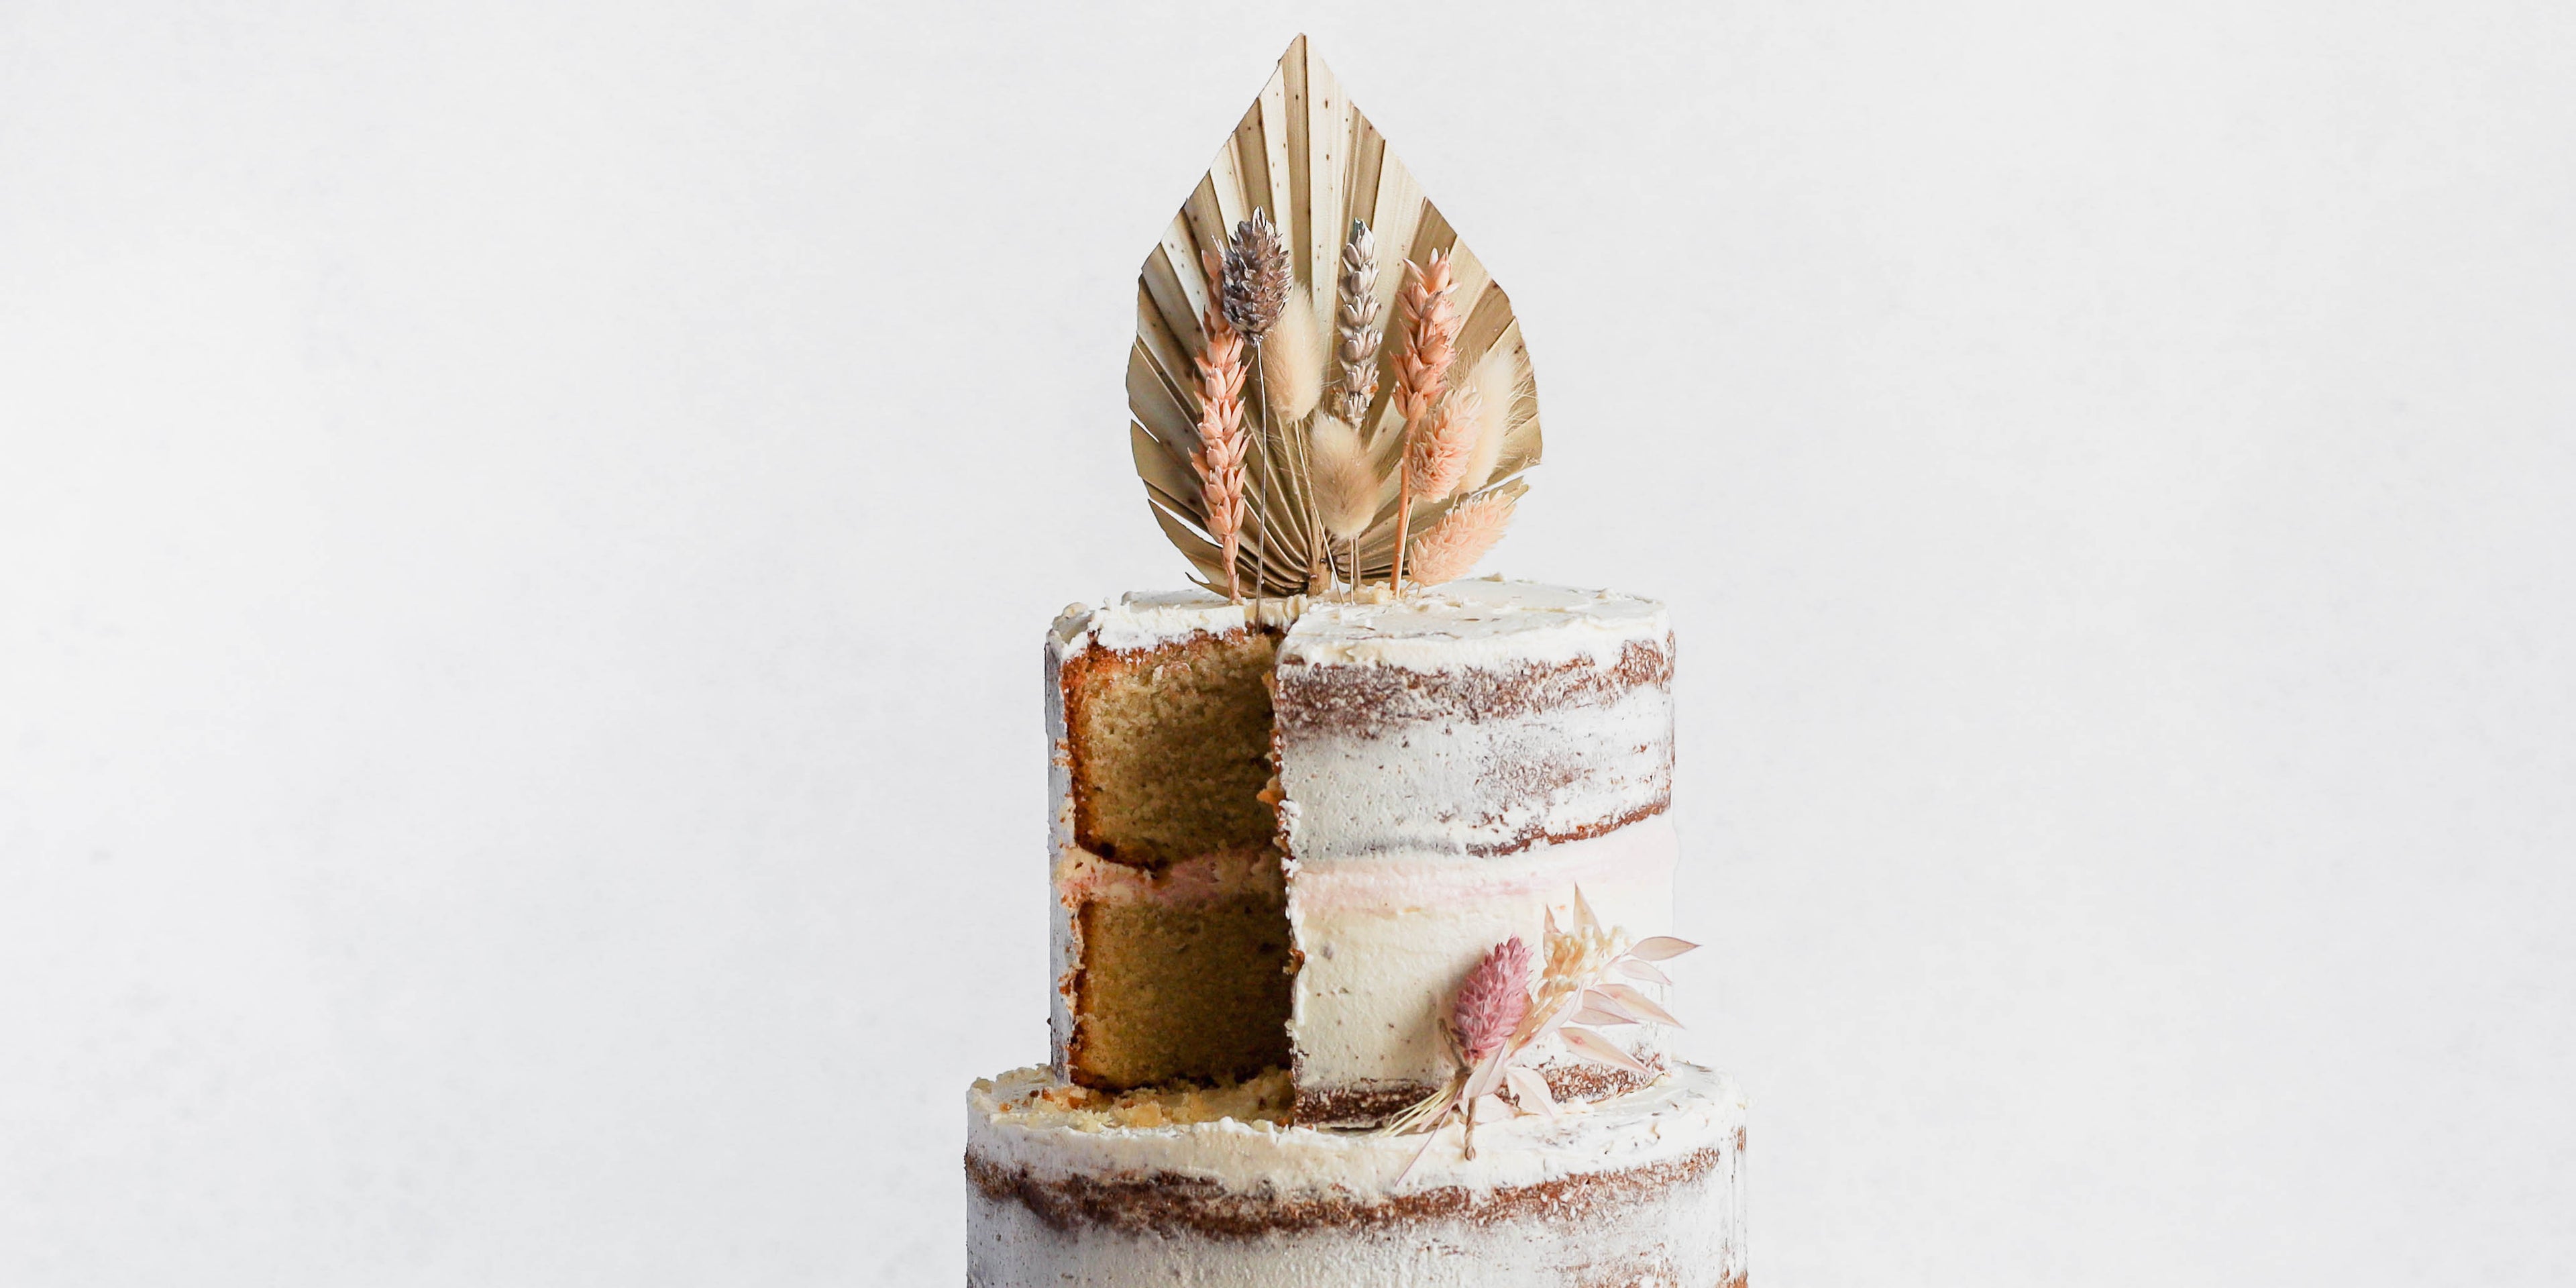 A close up view of a three tiered naked vanilla celebration cake with a slice cut out